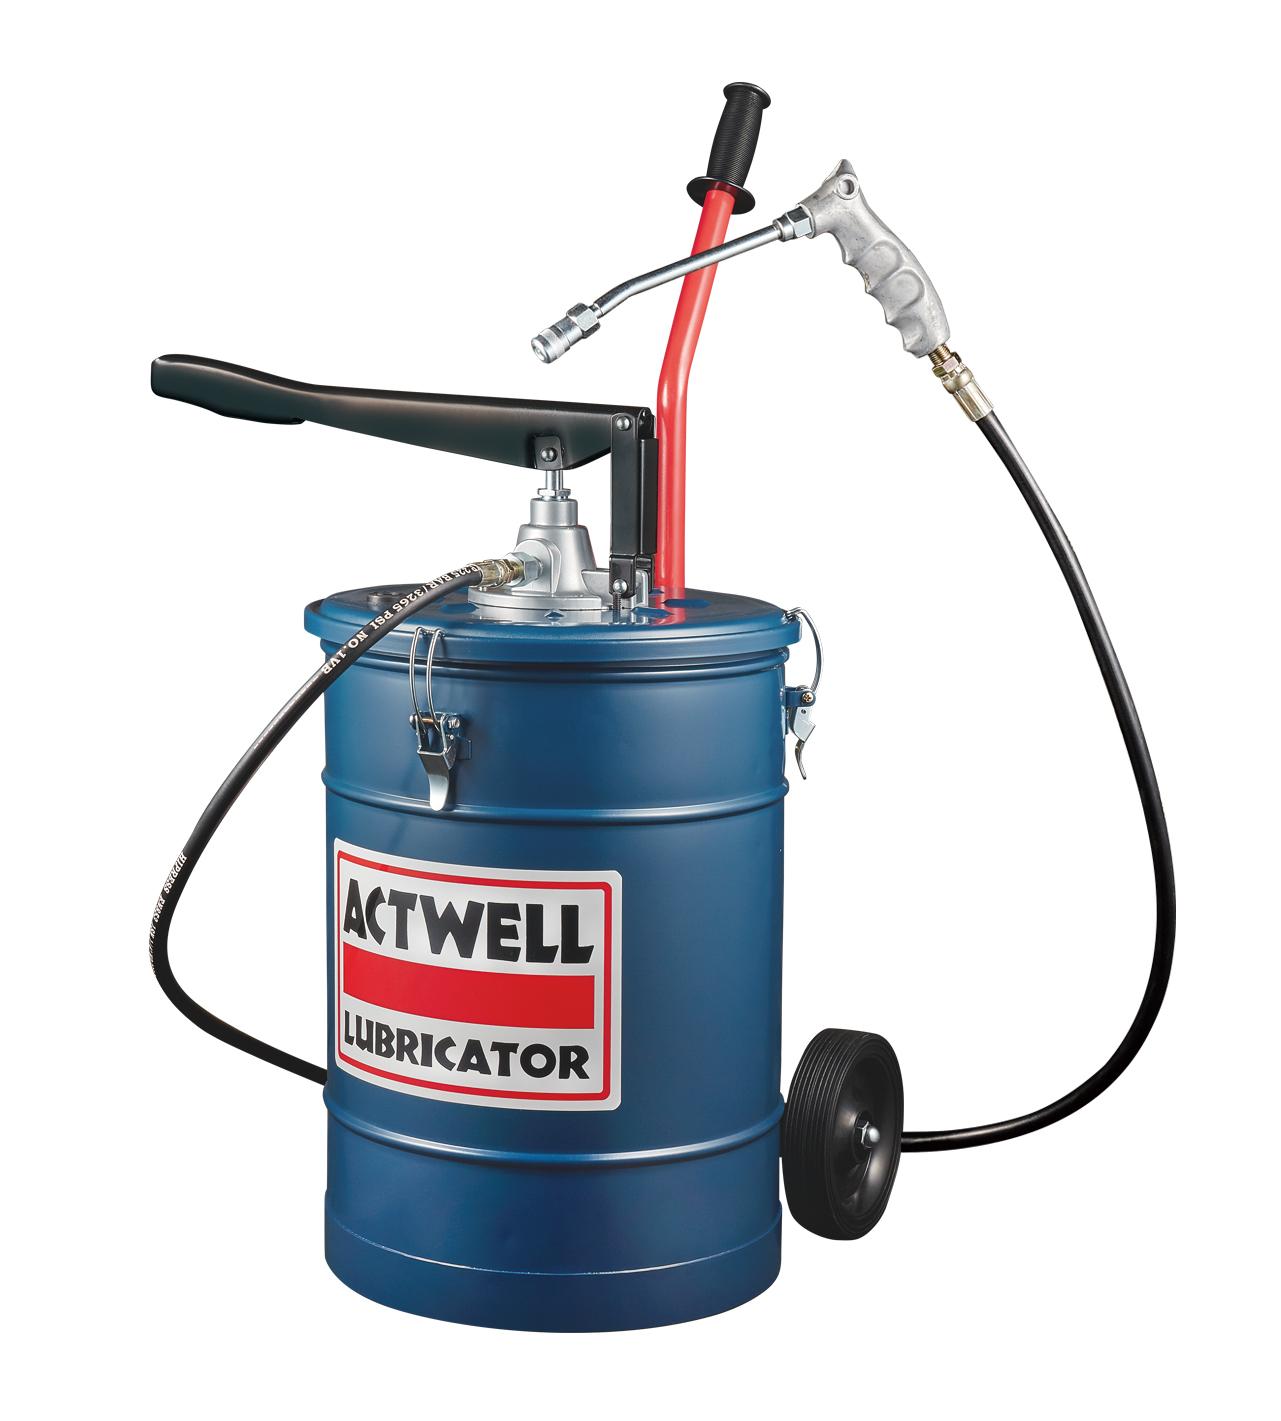 Hand-operated Grease Lubricator